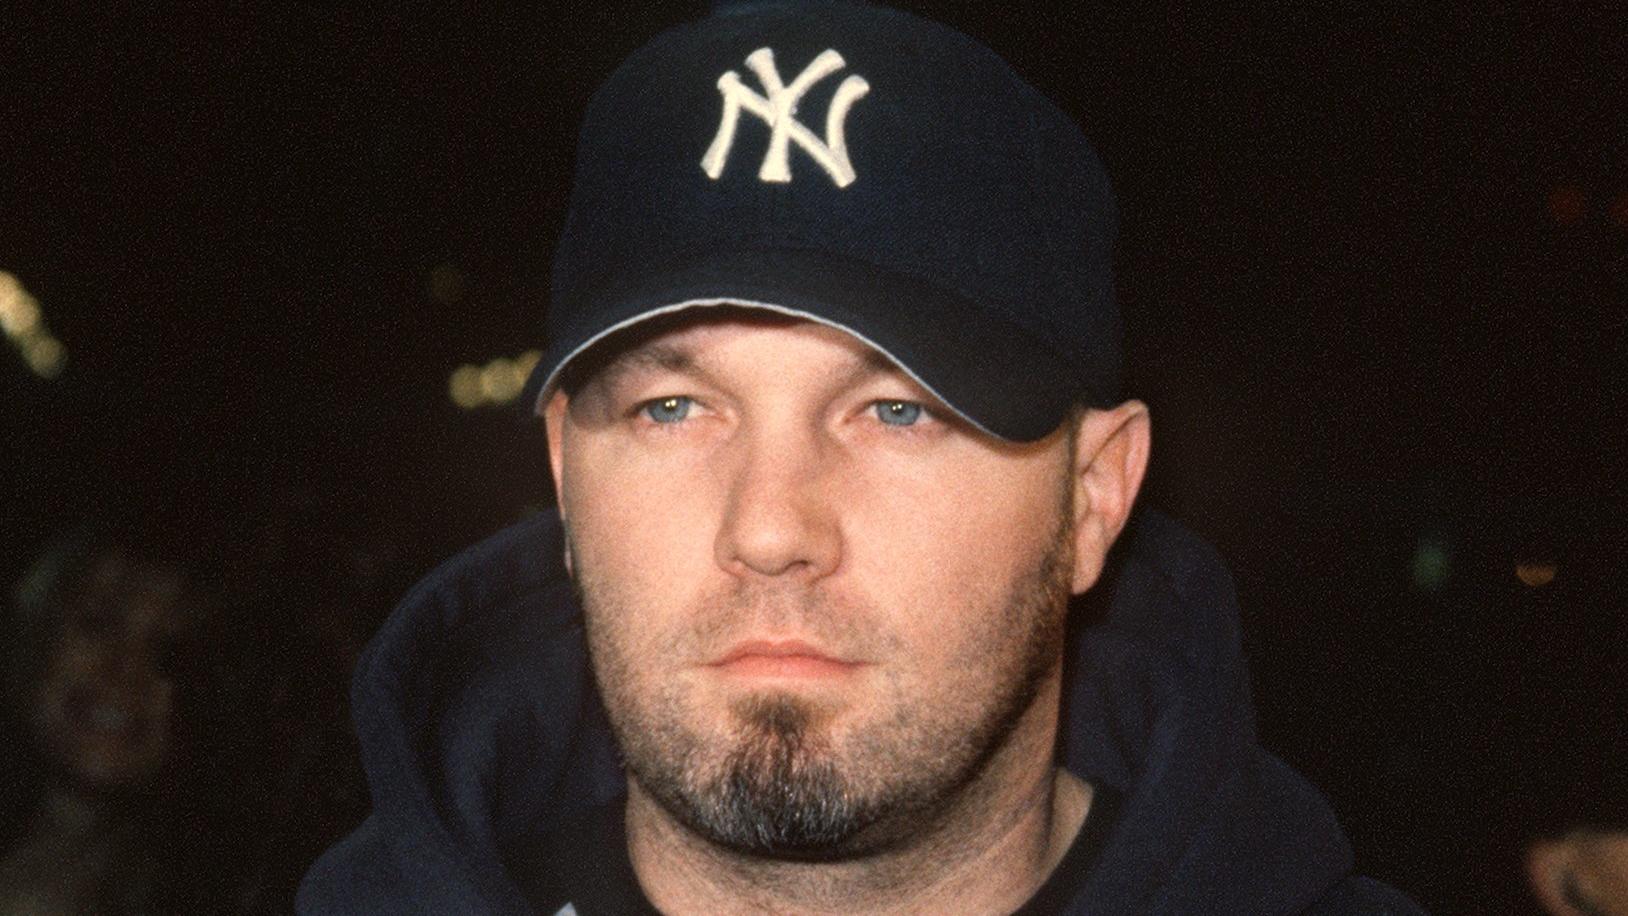 Fred Durst Limp Bizkit S Fred Durst Shows Off Surprising New Look Jul Fred